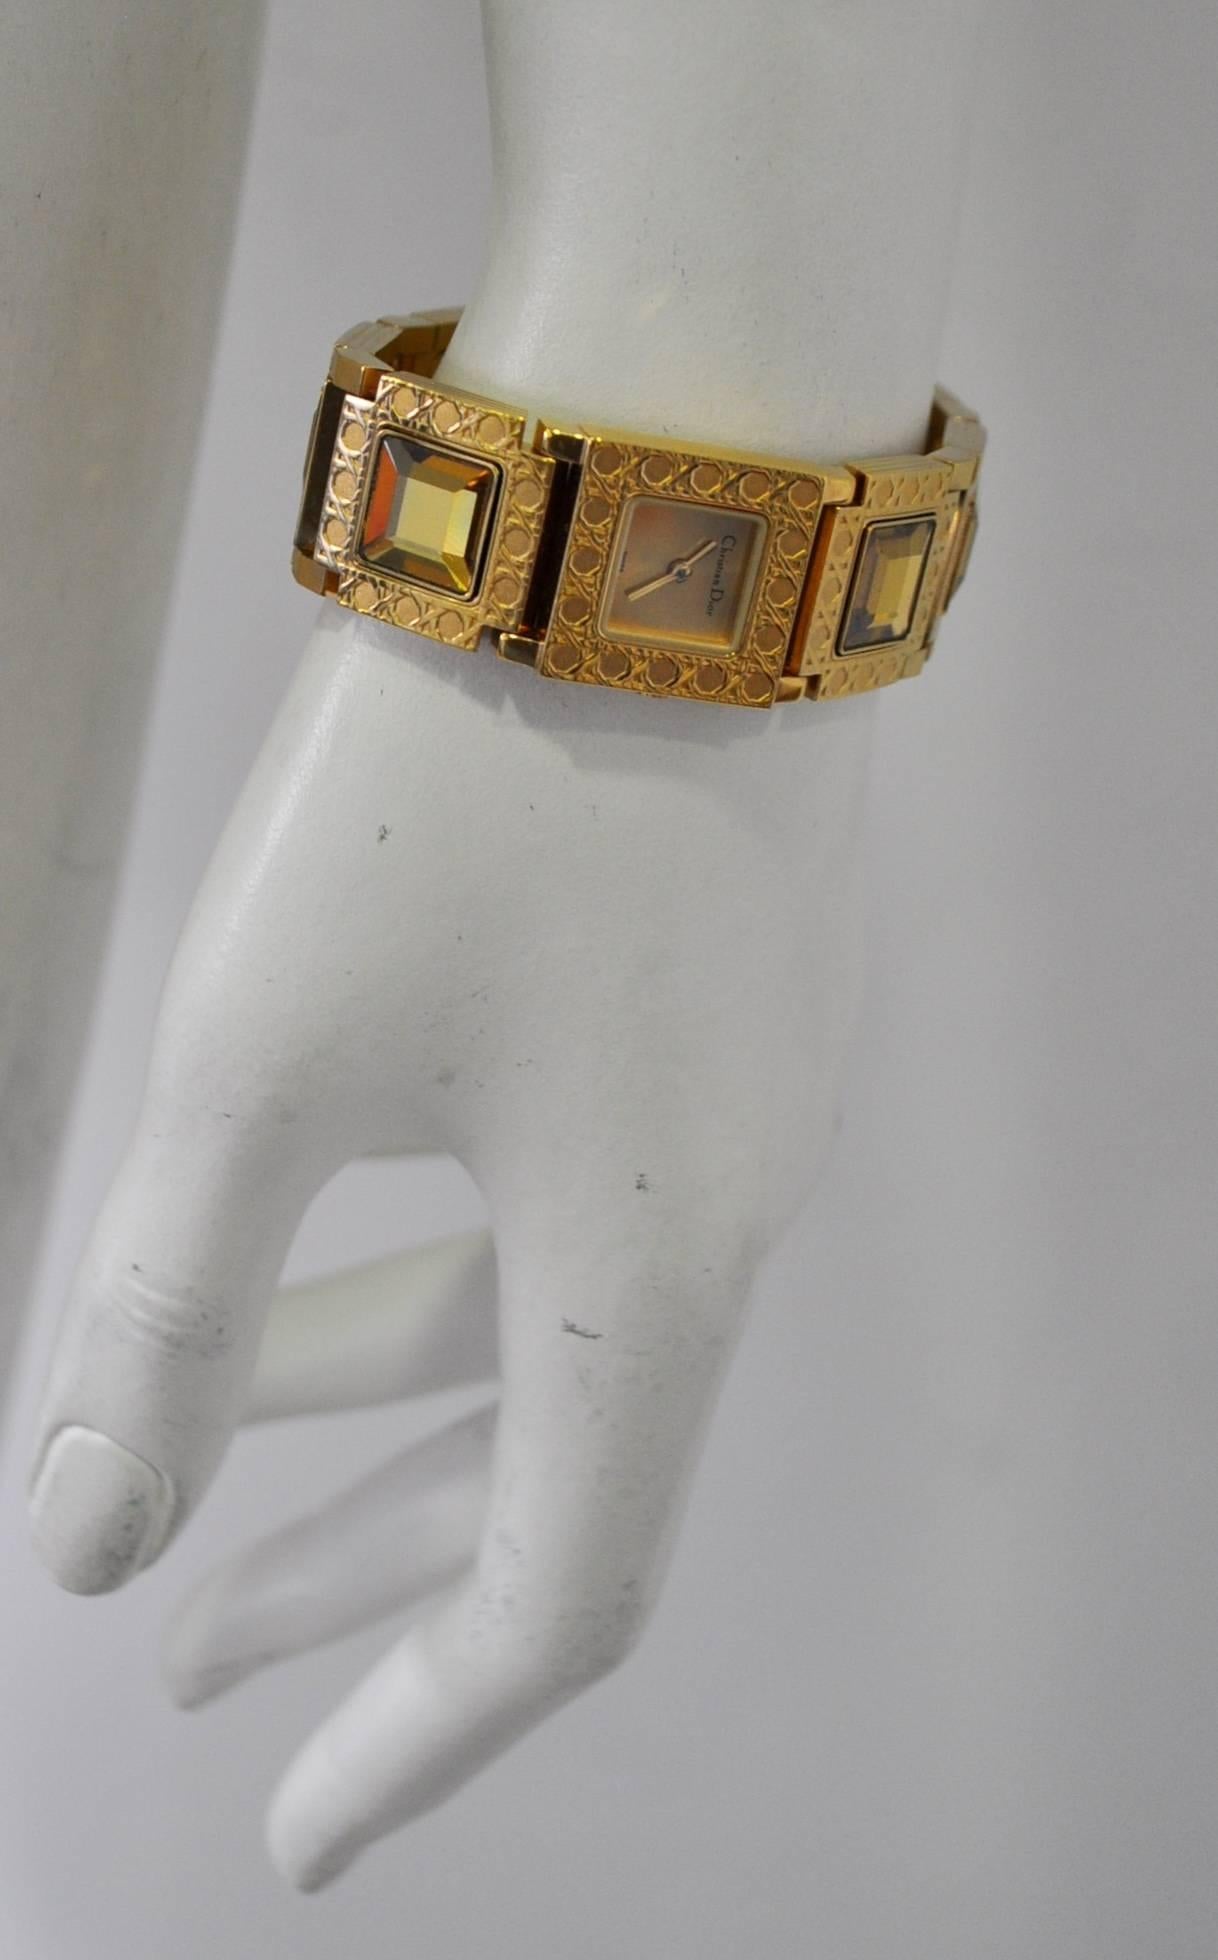 Authentic Christian Dior Jewel Encrusted Gold Tone Link Watch For Sale 2